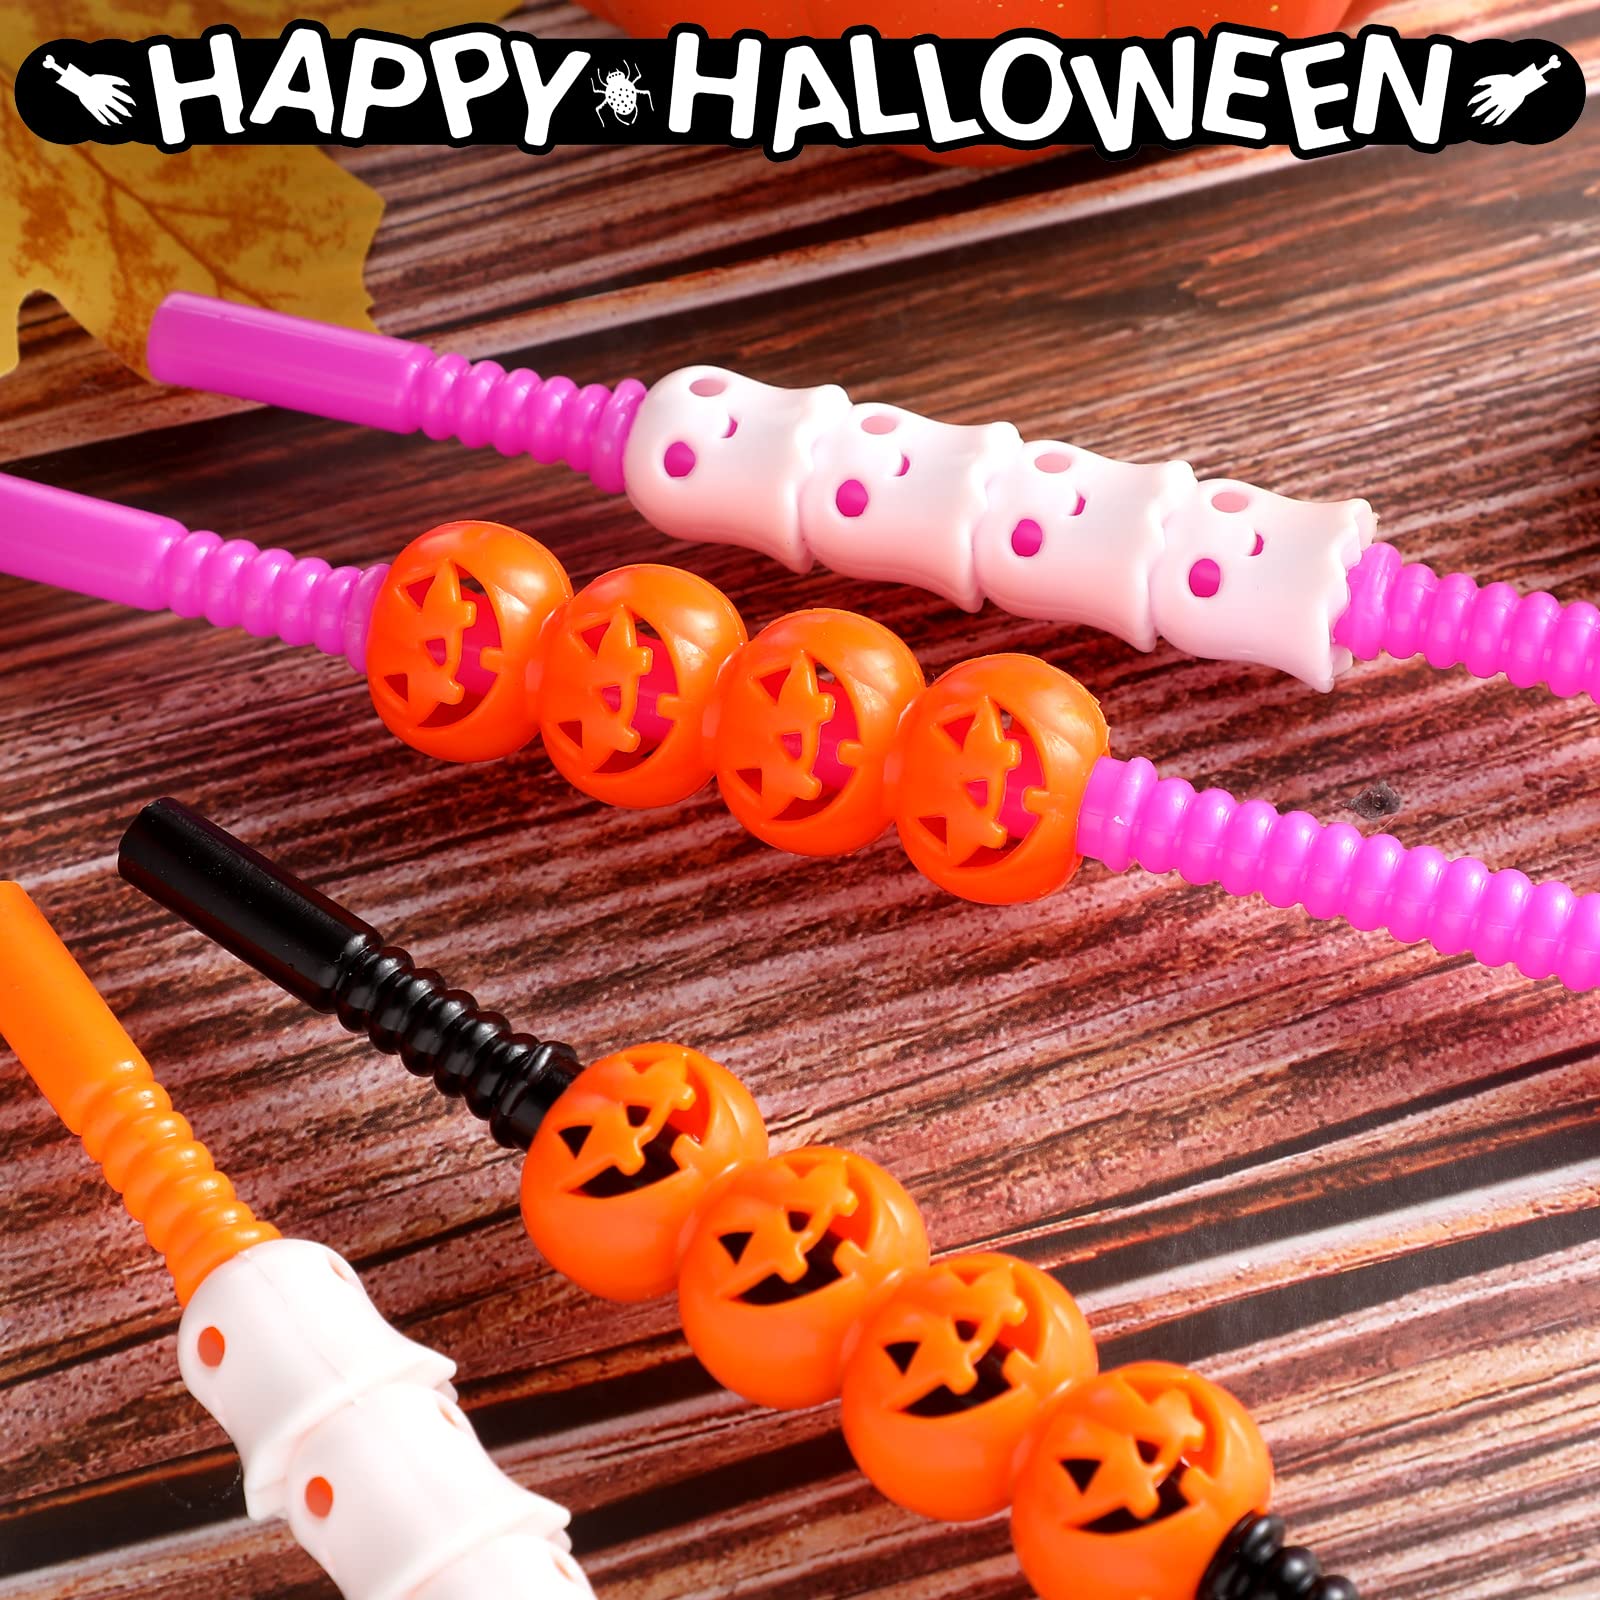 28 Pcs Halloween Straws Plastic Party Straws Include Pumpkin Ghost Reusable Drinking Straws Halloween Party Decoration for Kids Halloween Party Supply